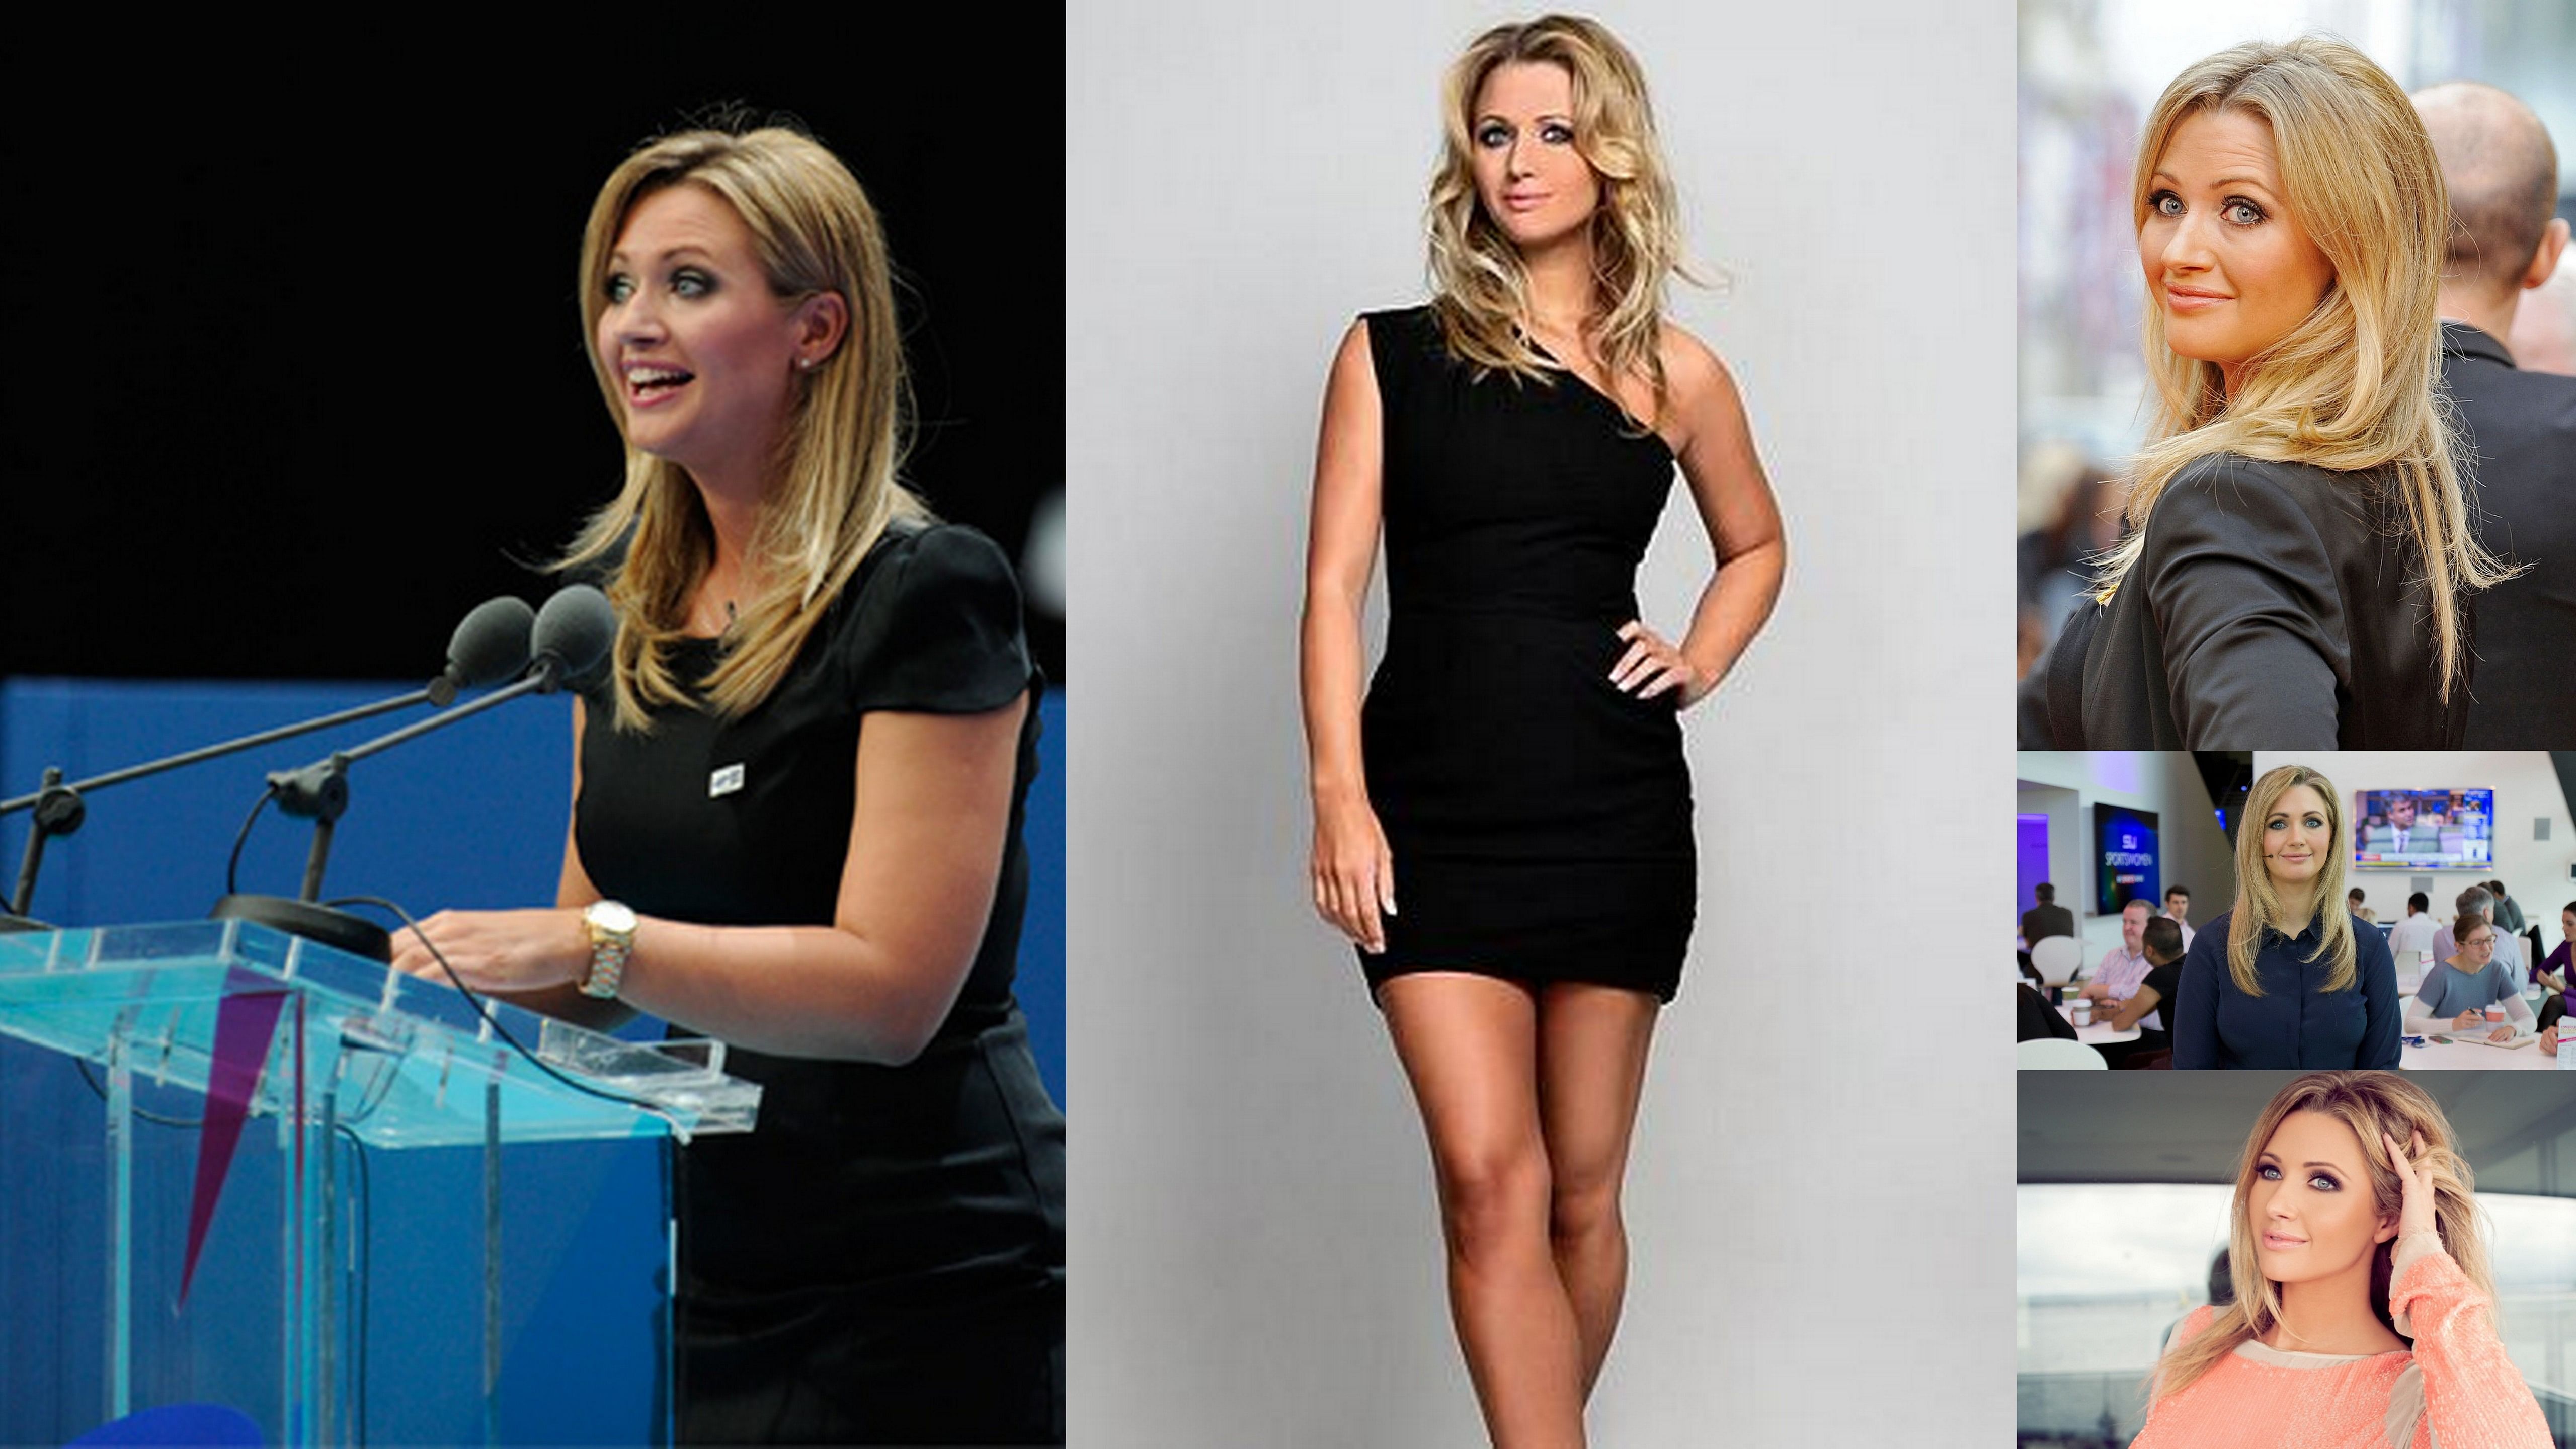 The Top 10 Hottest Female Football Presenters Slide 4 Of 10